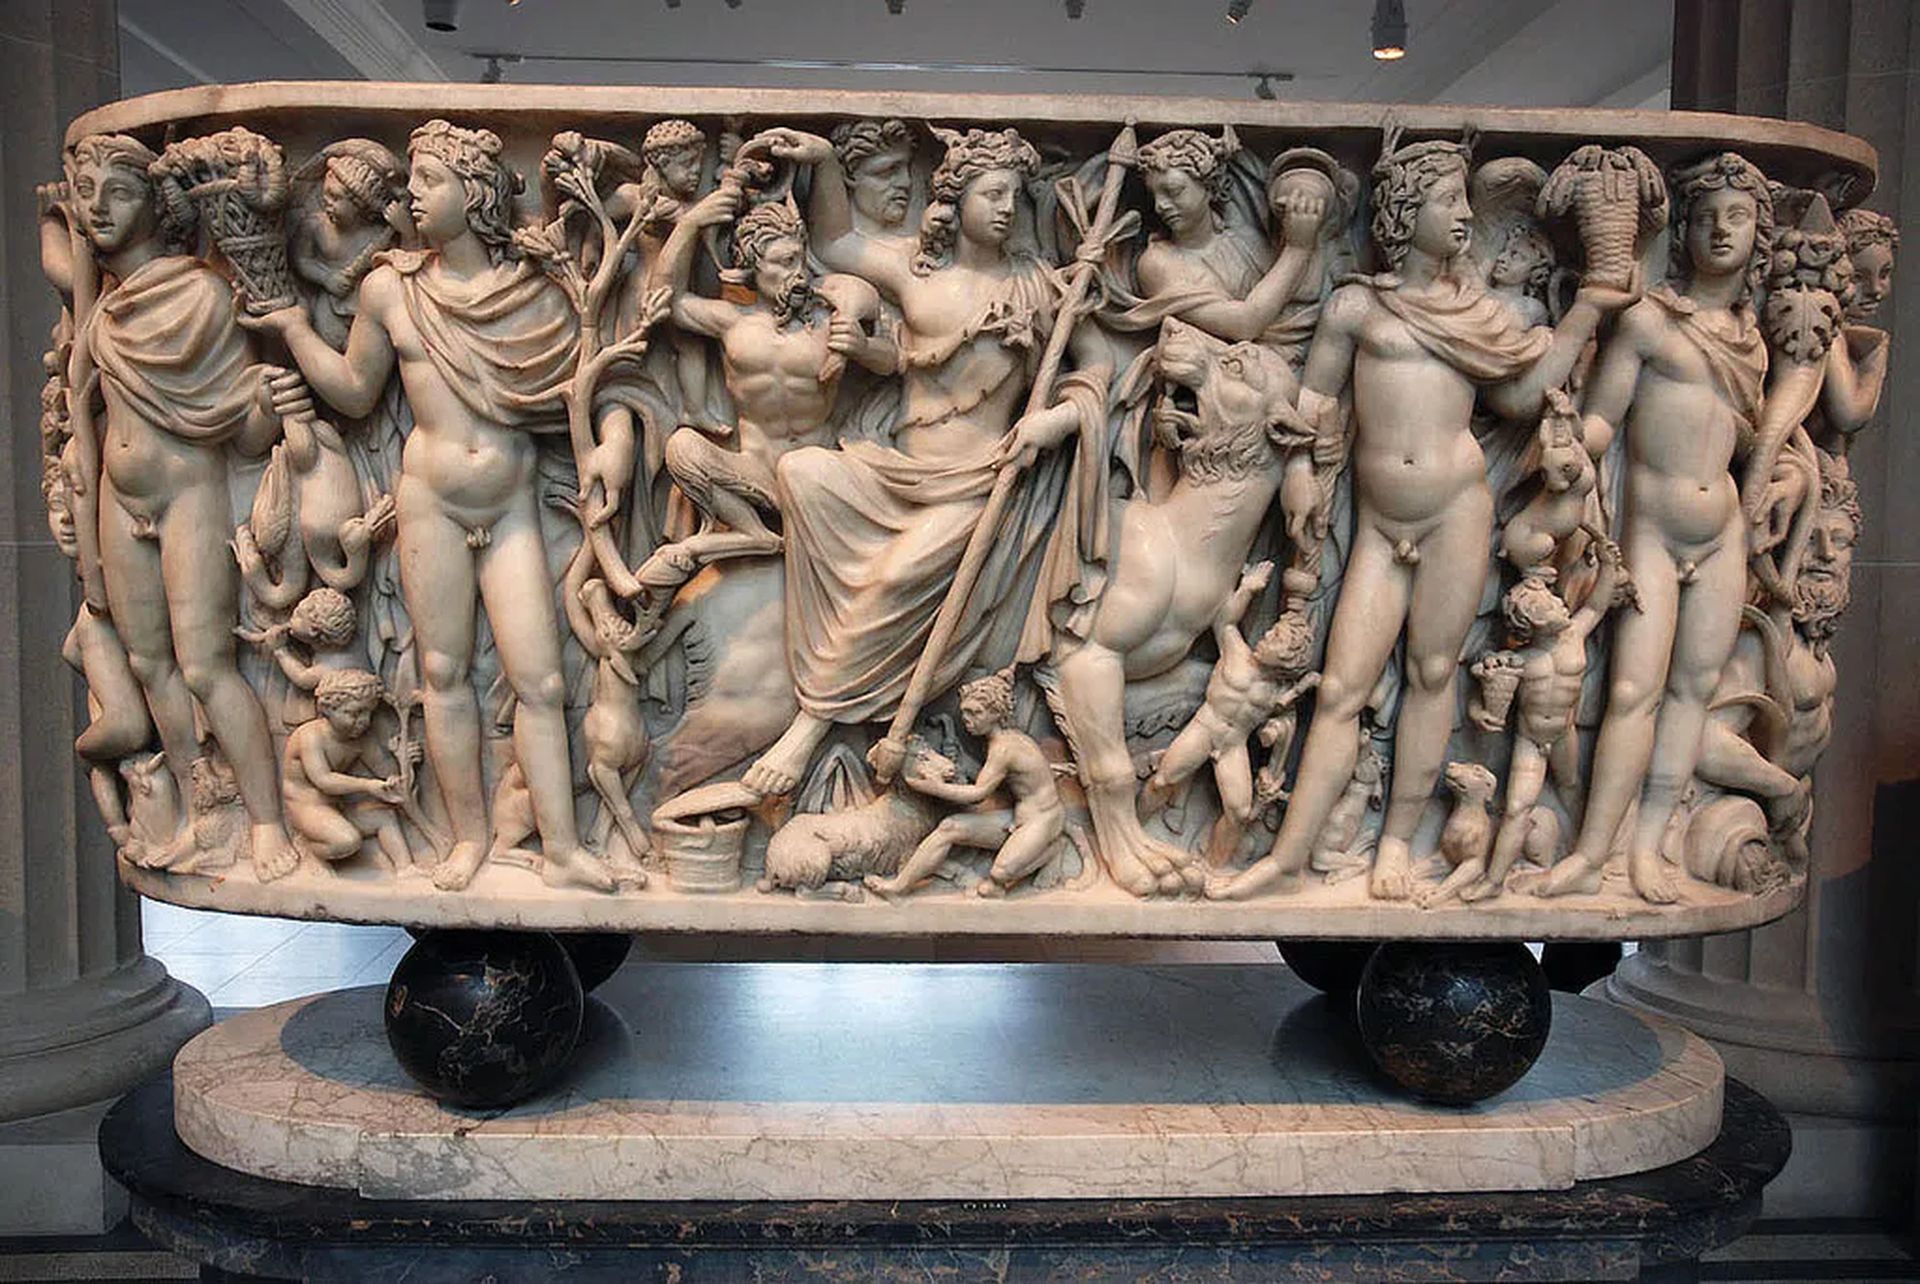 Marble sarcophagus depicting the Triumph of Dionysus and the Seasons, Phrygian marble, Roman, c. 260–270 CE; in the Metropolitan Museum of Art, New York City. The central figure is Dionysus, seated on the back of a panther. In the left foreground are the male figures representing Winter and Spring, and to the right of Dionysus are the male figures representing Summer and Fall. The remaining figures shown are other objects and personages associated with the Bacchic cult. Photograph by Margaret Pierson. The Metropolitan Museum of Art, New York City, purchase, Joseph Pulitzer Bequest, 1955 (55.11.5)